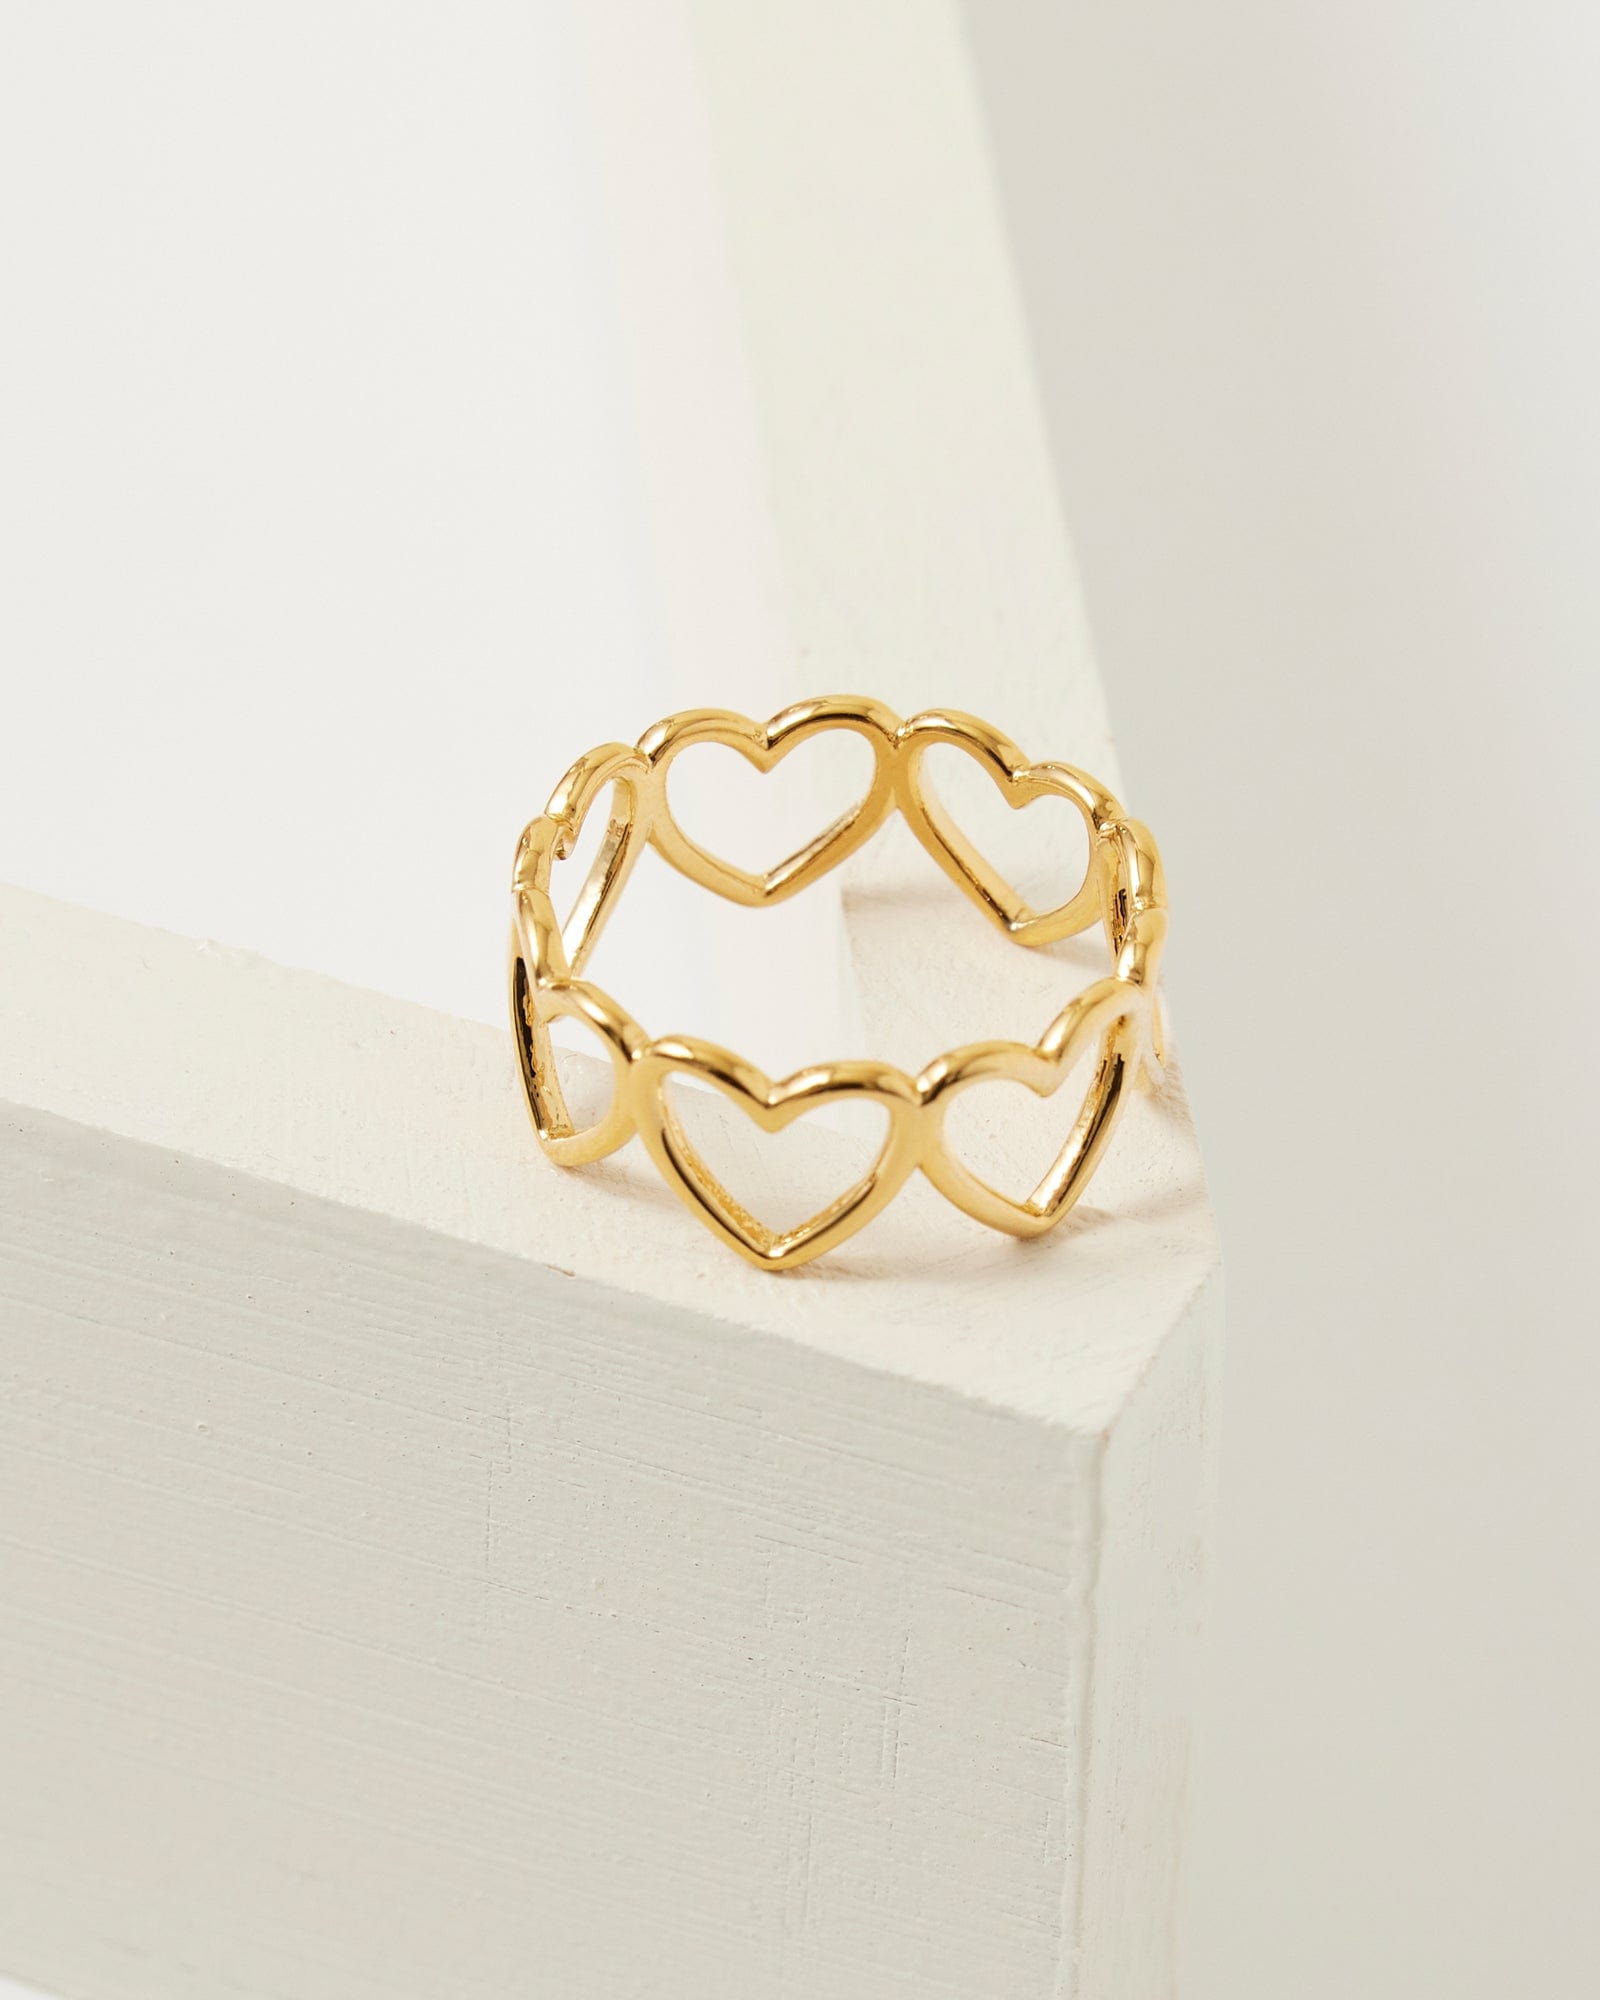 Gold ring with heart design around band